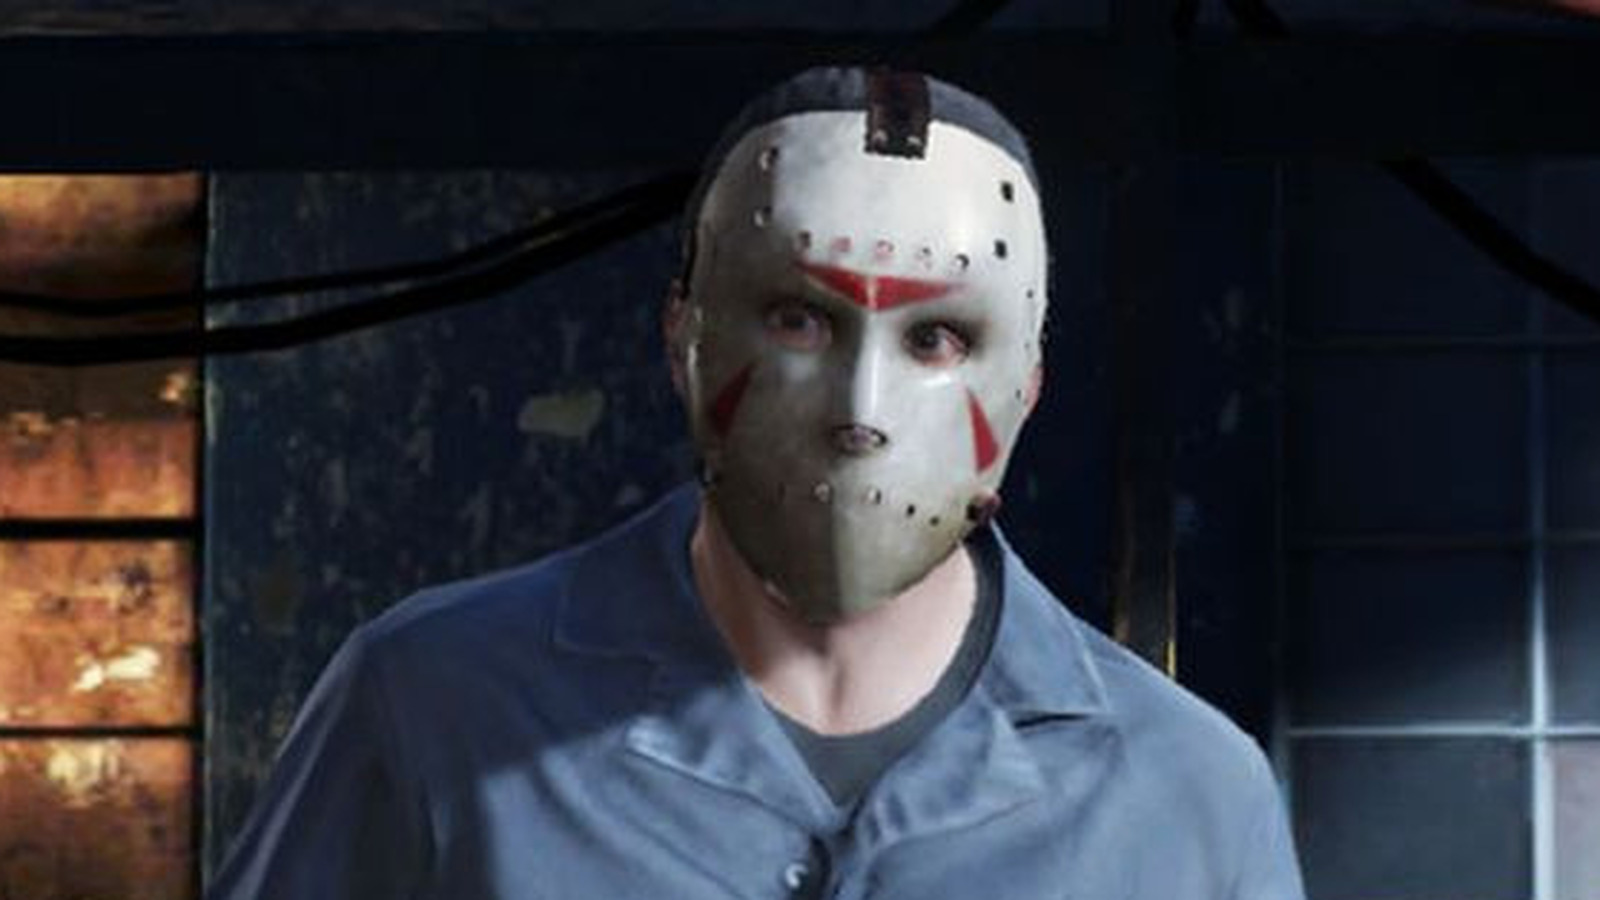 Jason (Part 4) - Friday the 13th: The Game Wiki